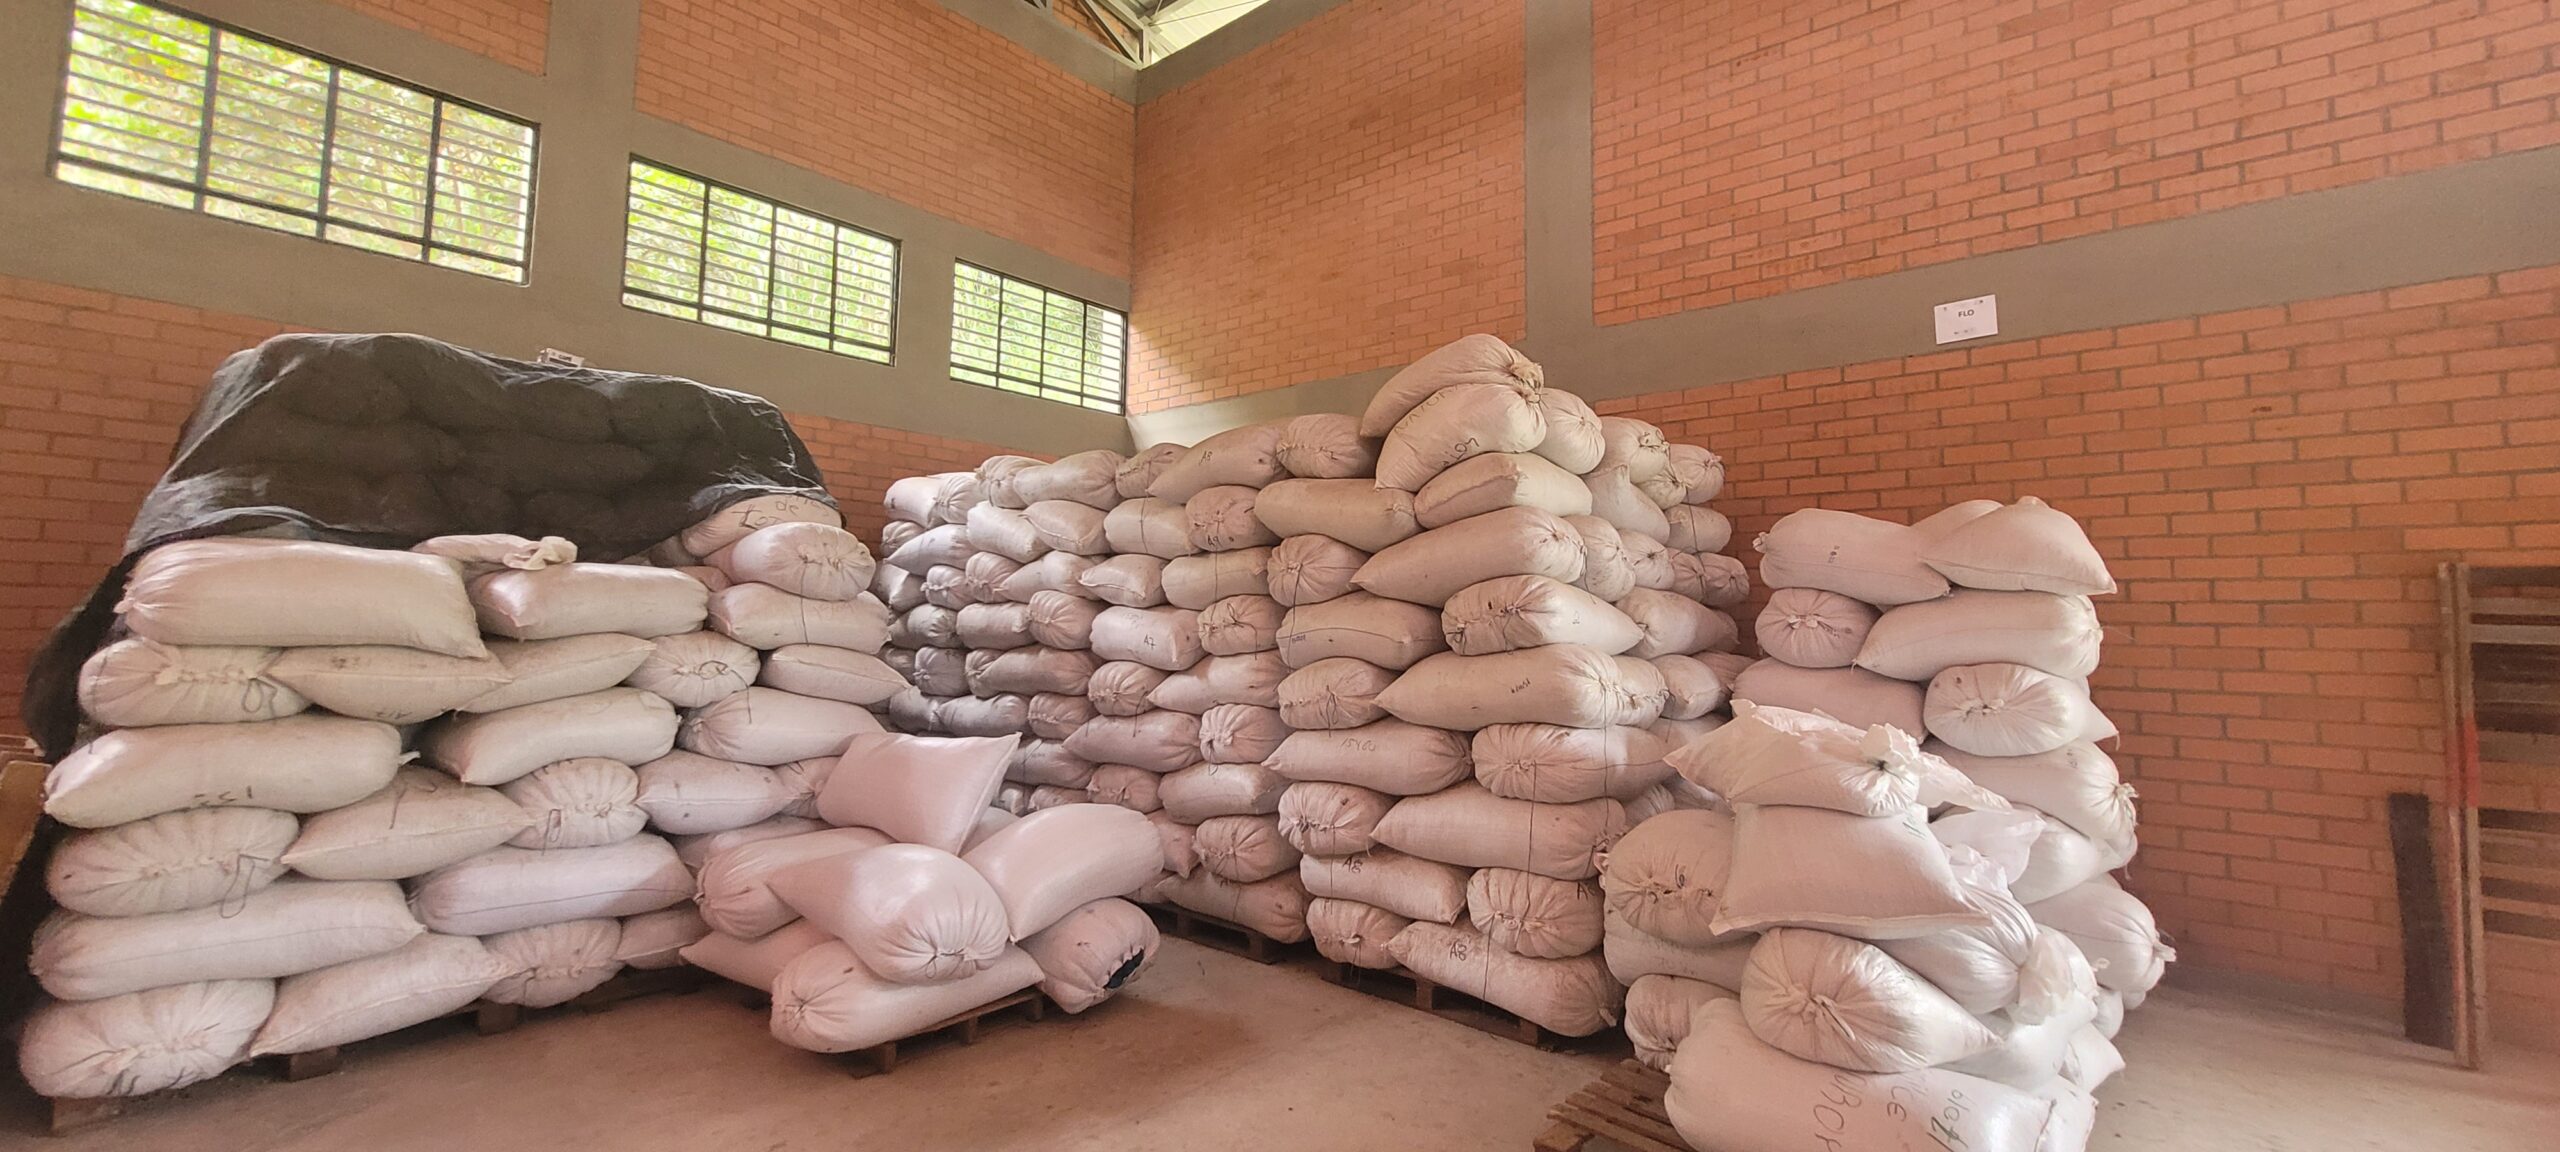 Parchment coffee awaits shipment to a processing plant at an ASOPEP warehouse in Planadas, Colombia. Credit: Root Capital.